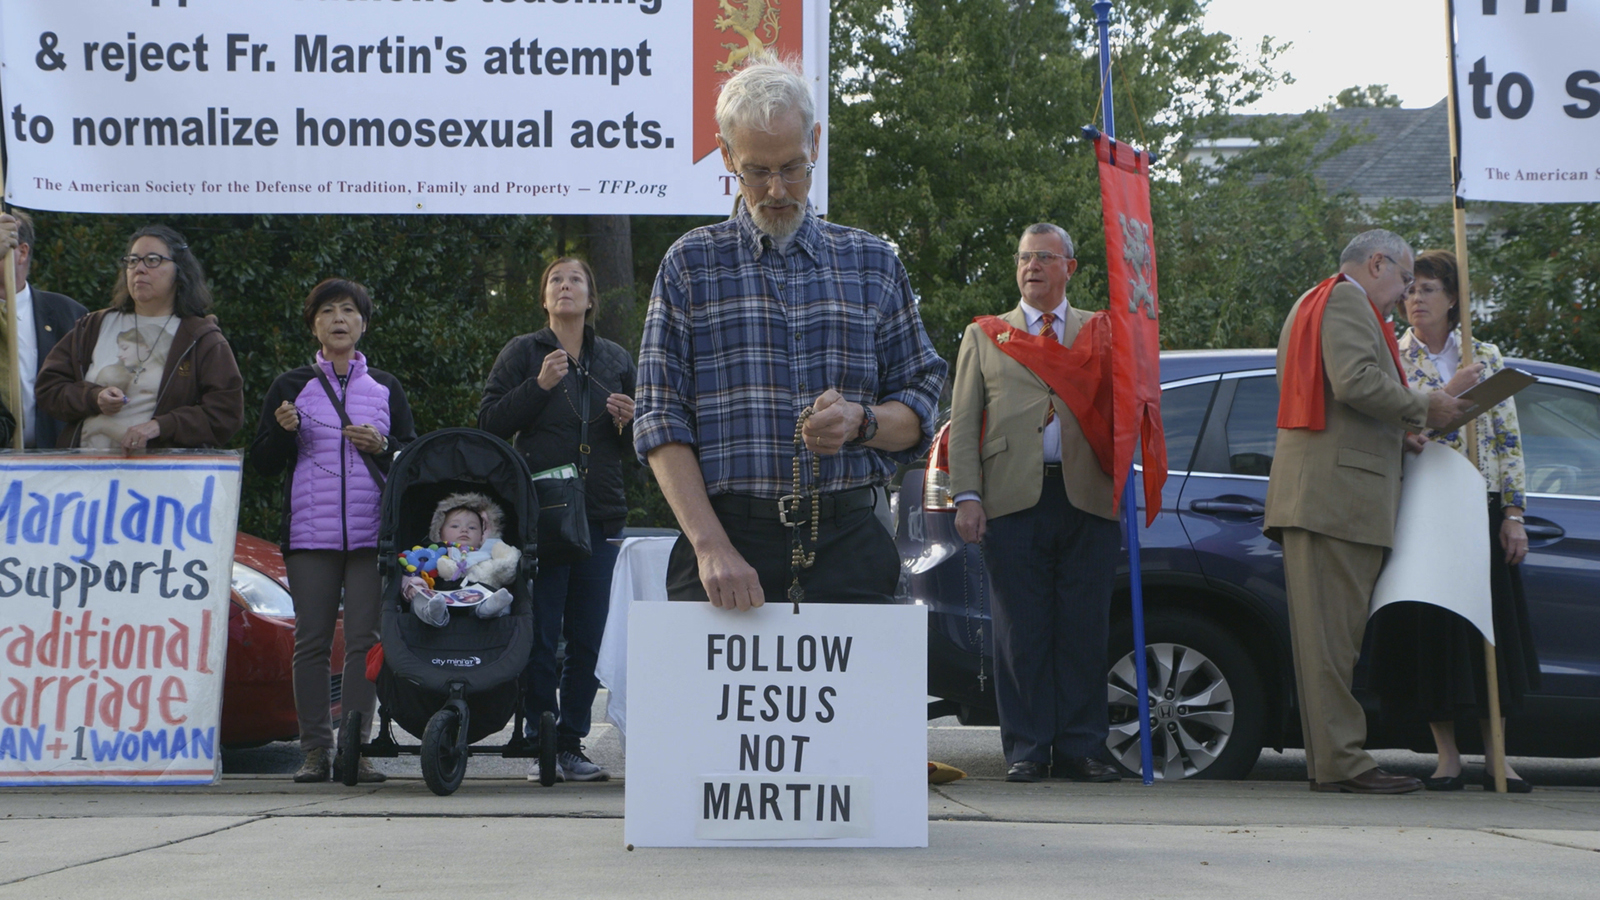 People opposing the Rev. James Martin in the documentary "Building A Bridge." Photo courtesy Building A Bridge